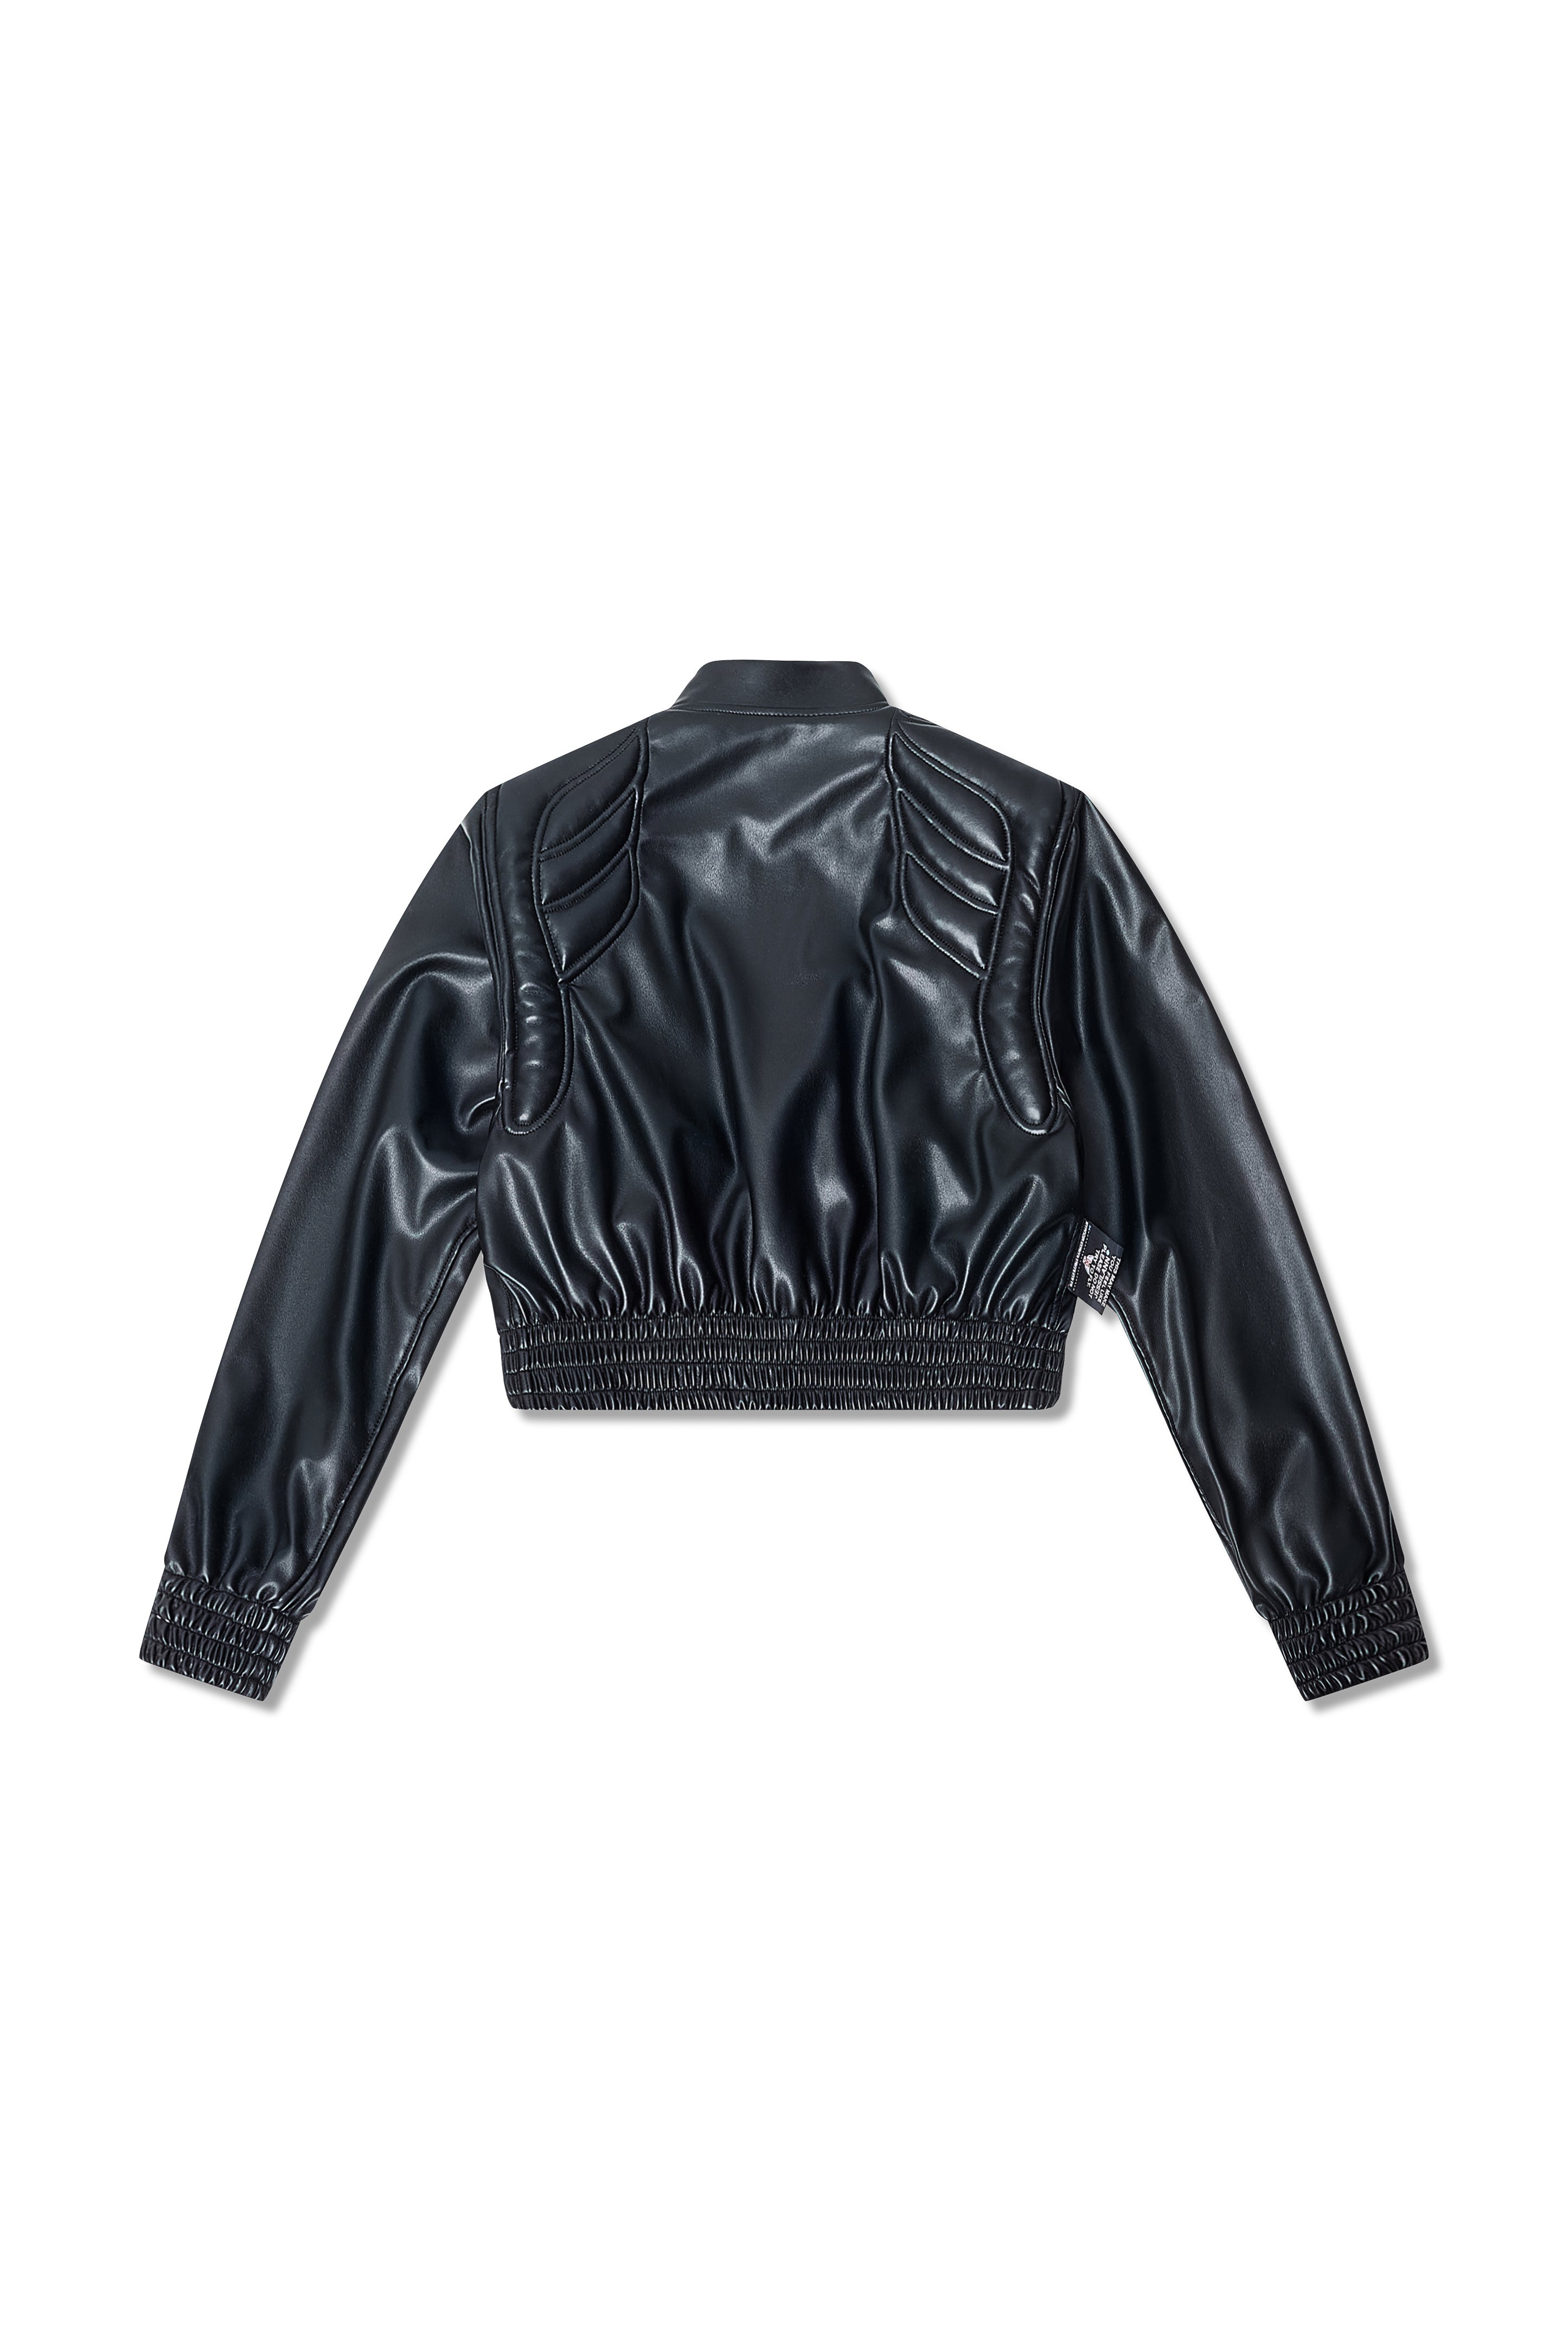 VEGAN LEATHER COUTURE JACKET